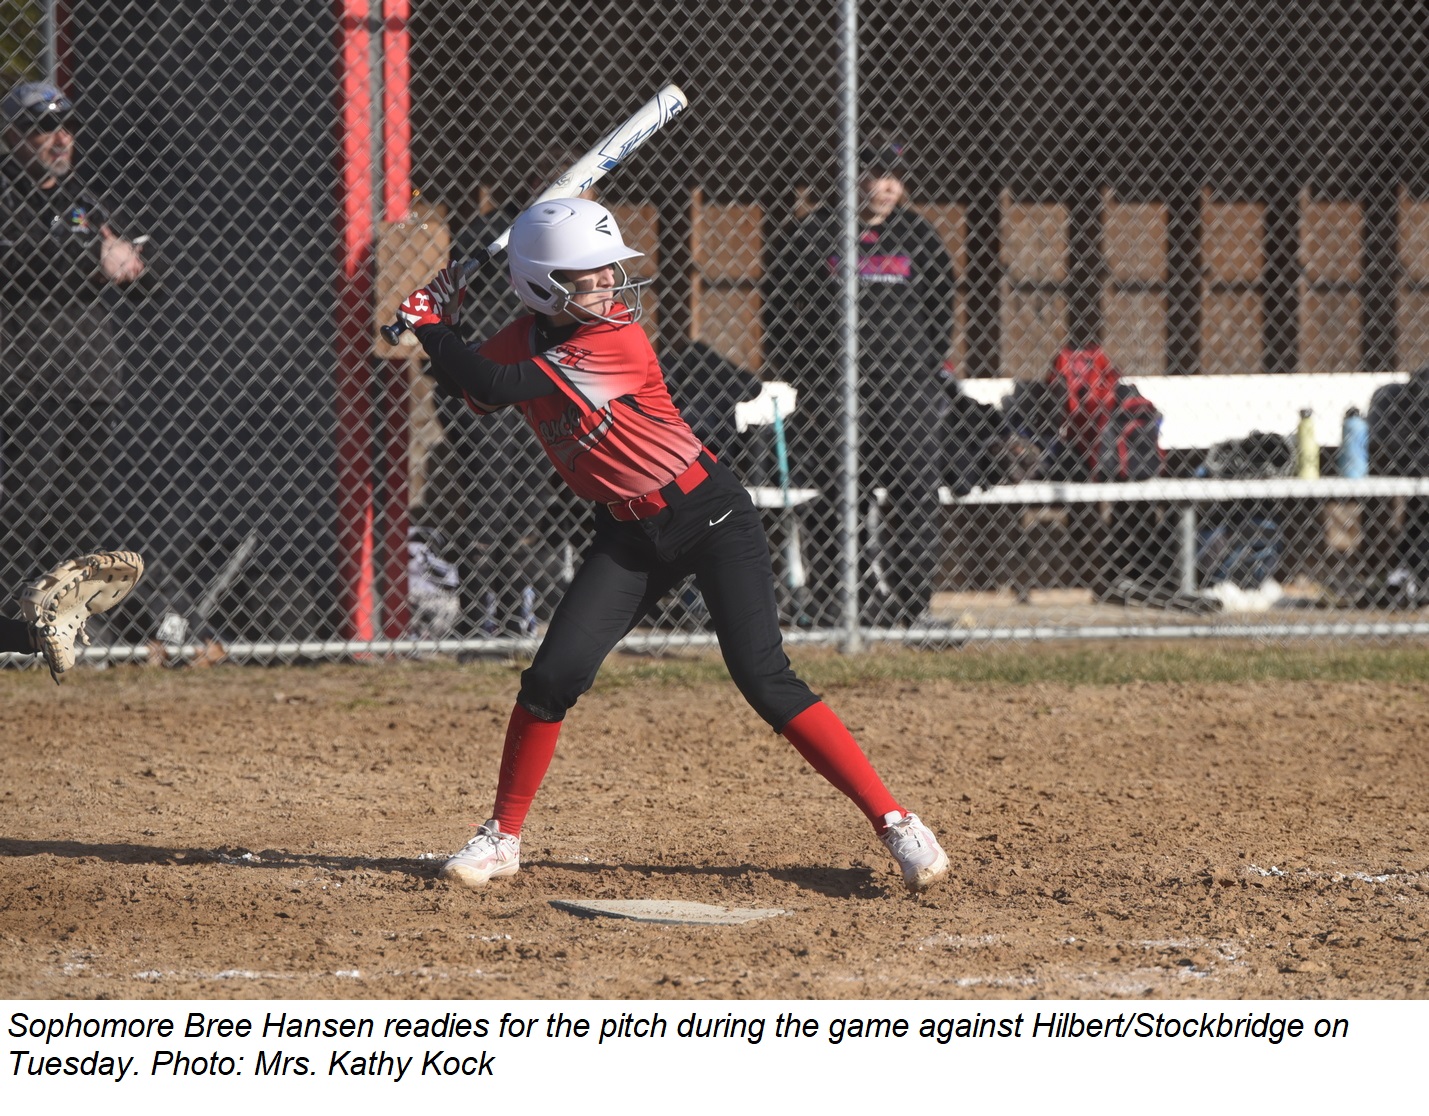 Bree Hansen readies for the pitch during the game against Hilbert/Stockbridge on Tuesday.